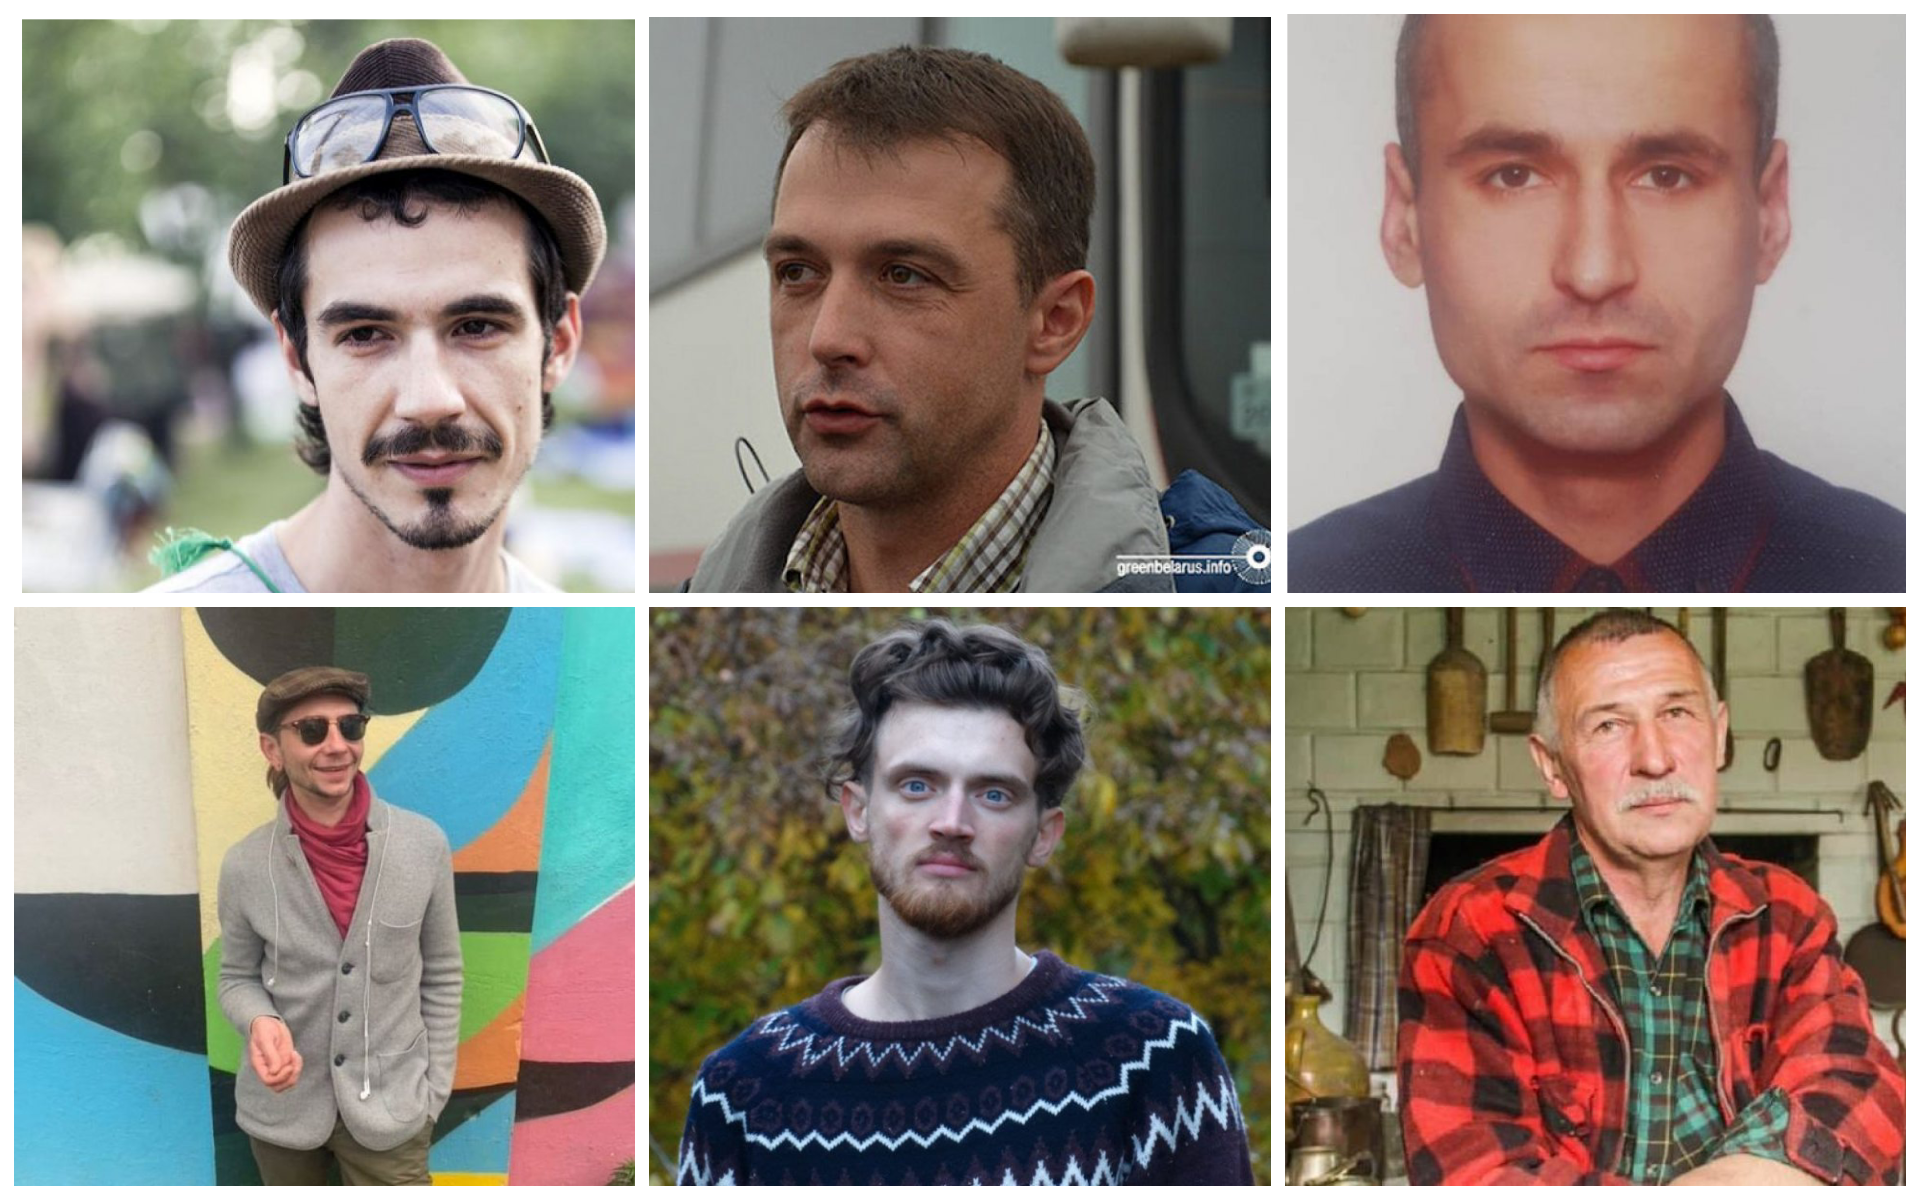 7 more peaceful protesters listed as political prisoners